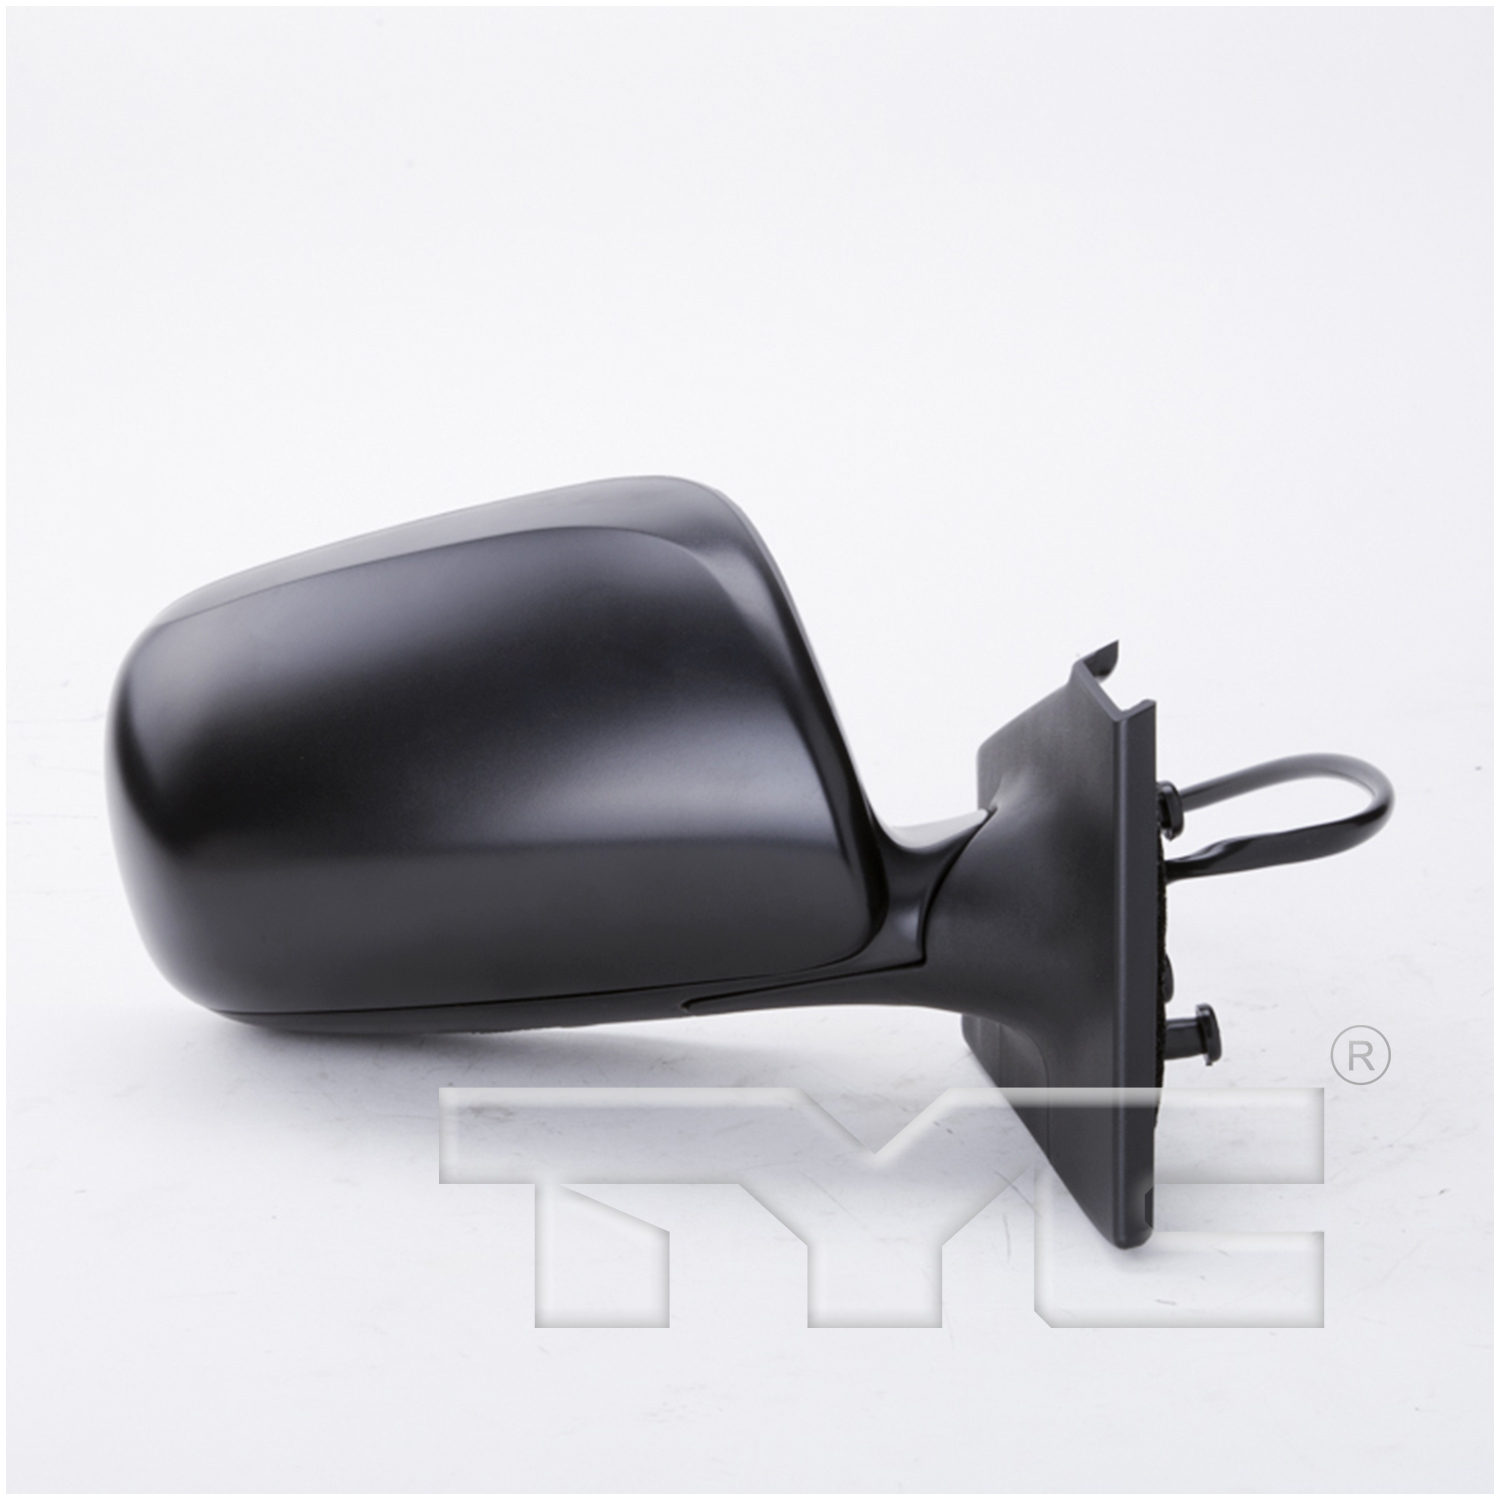 Aftermarket MIRRORS for TOYOTA - YARIS, YARIS,07-11,RT Mirror outside rear view